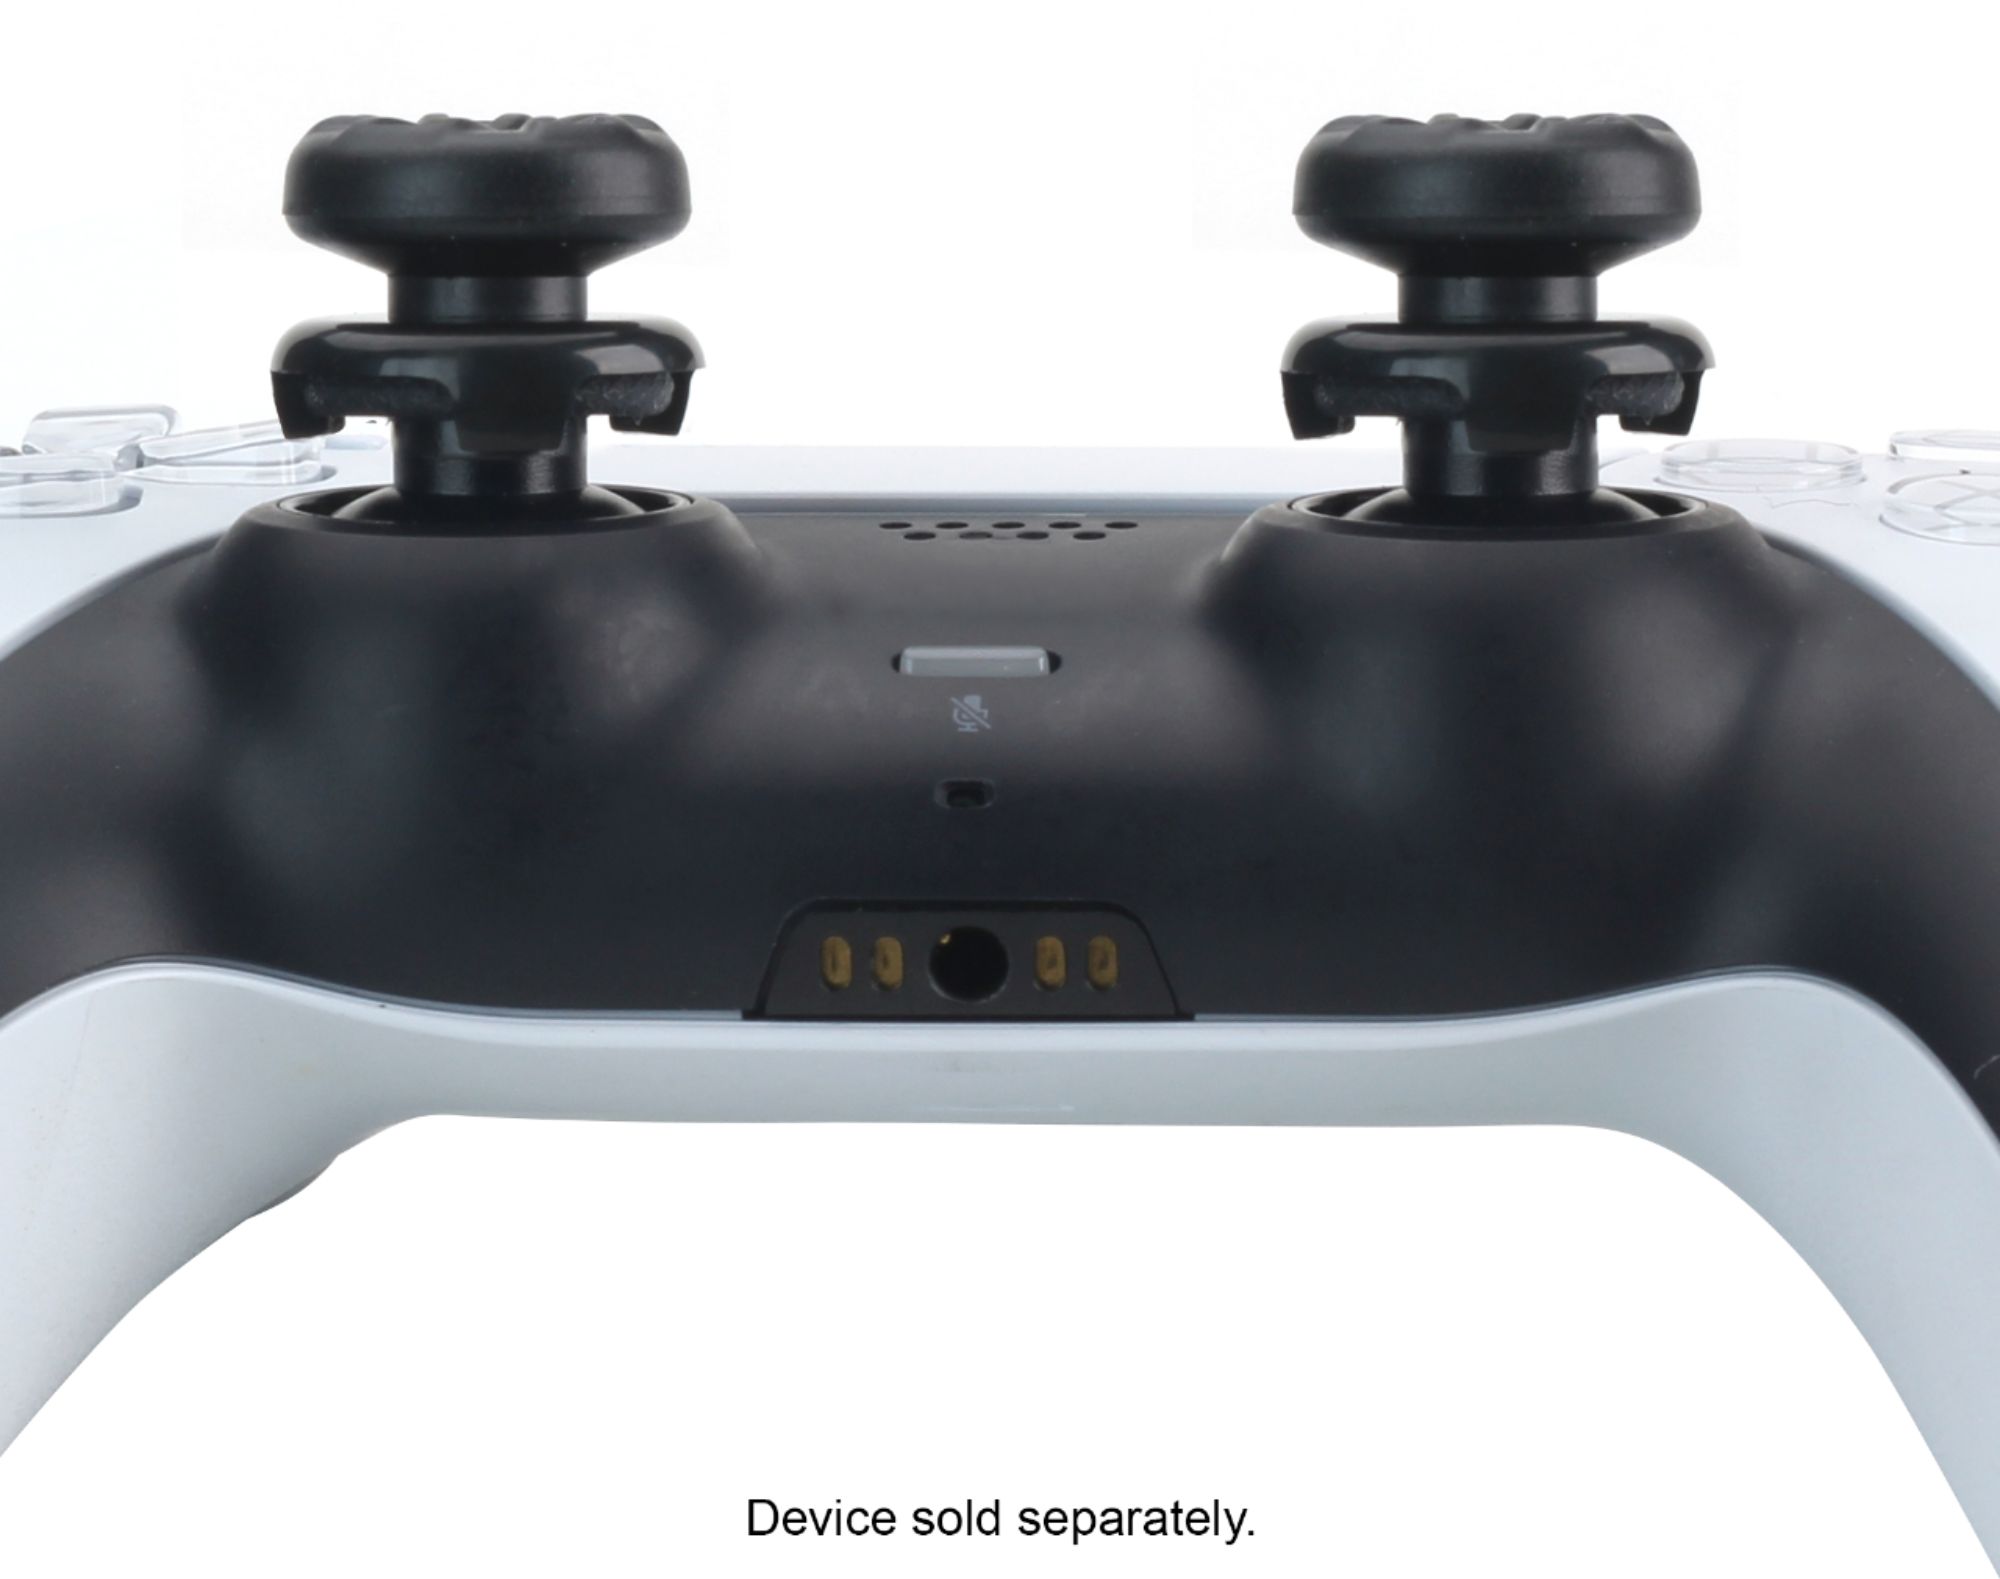  Performance Thumbstick Caps Replacement Kit for PS5